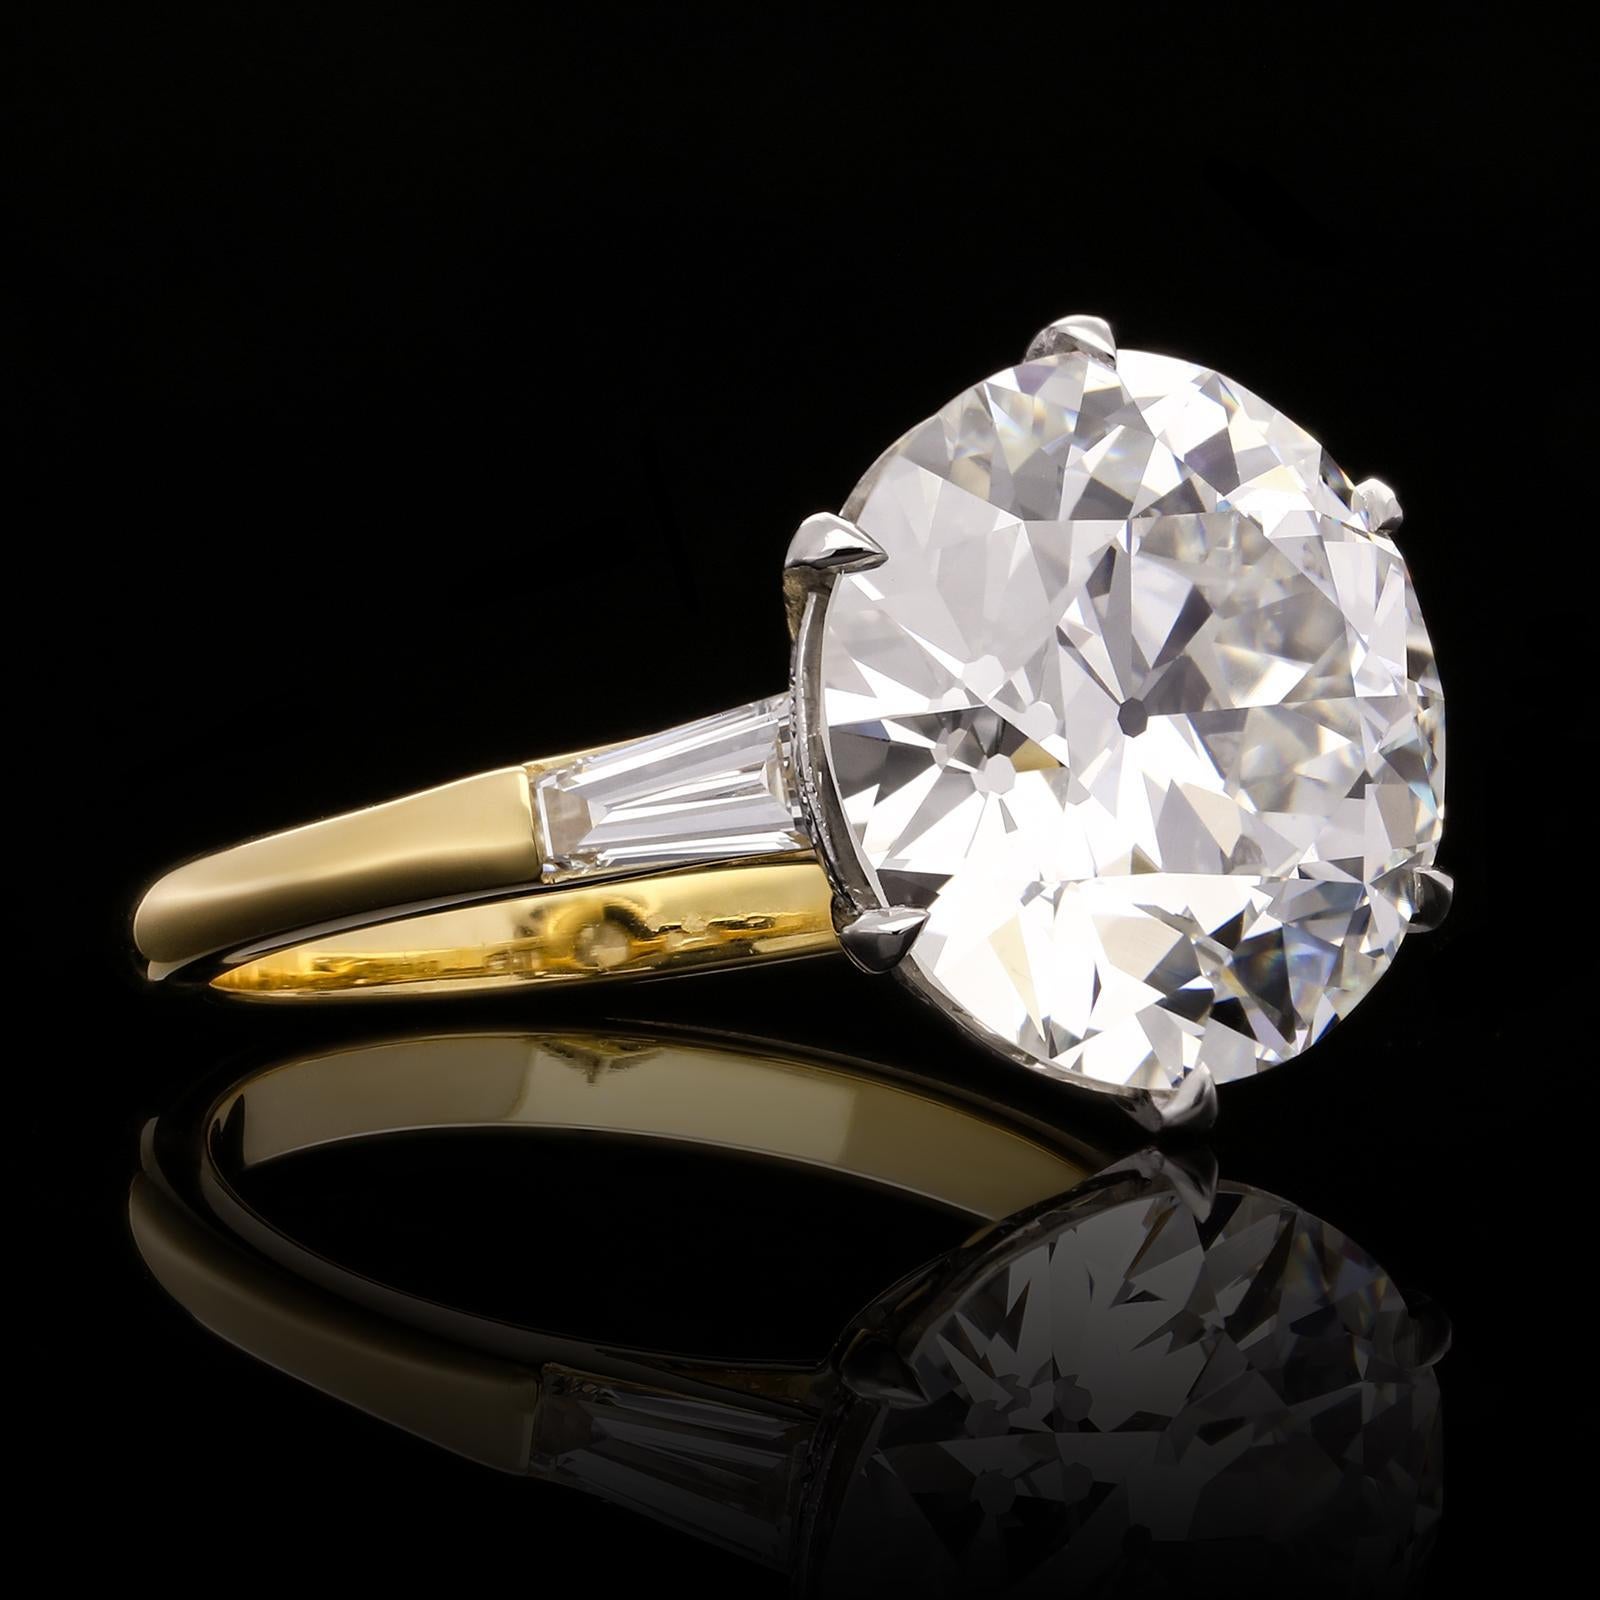 A stunning old cut diamond solitaire ring by Hancocks set with a beautiful bright and lively old European brilliant cut diamond weighing 7.09ct and of G colour and VS1 clarity claw set to a finely crafted handmade platinum and gold mount, the